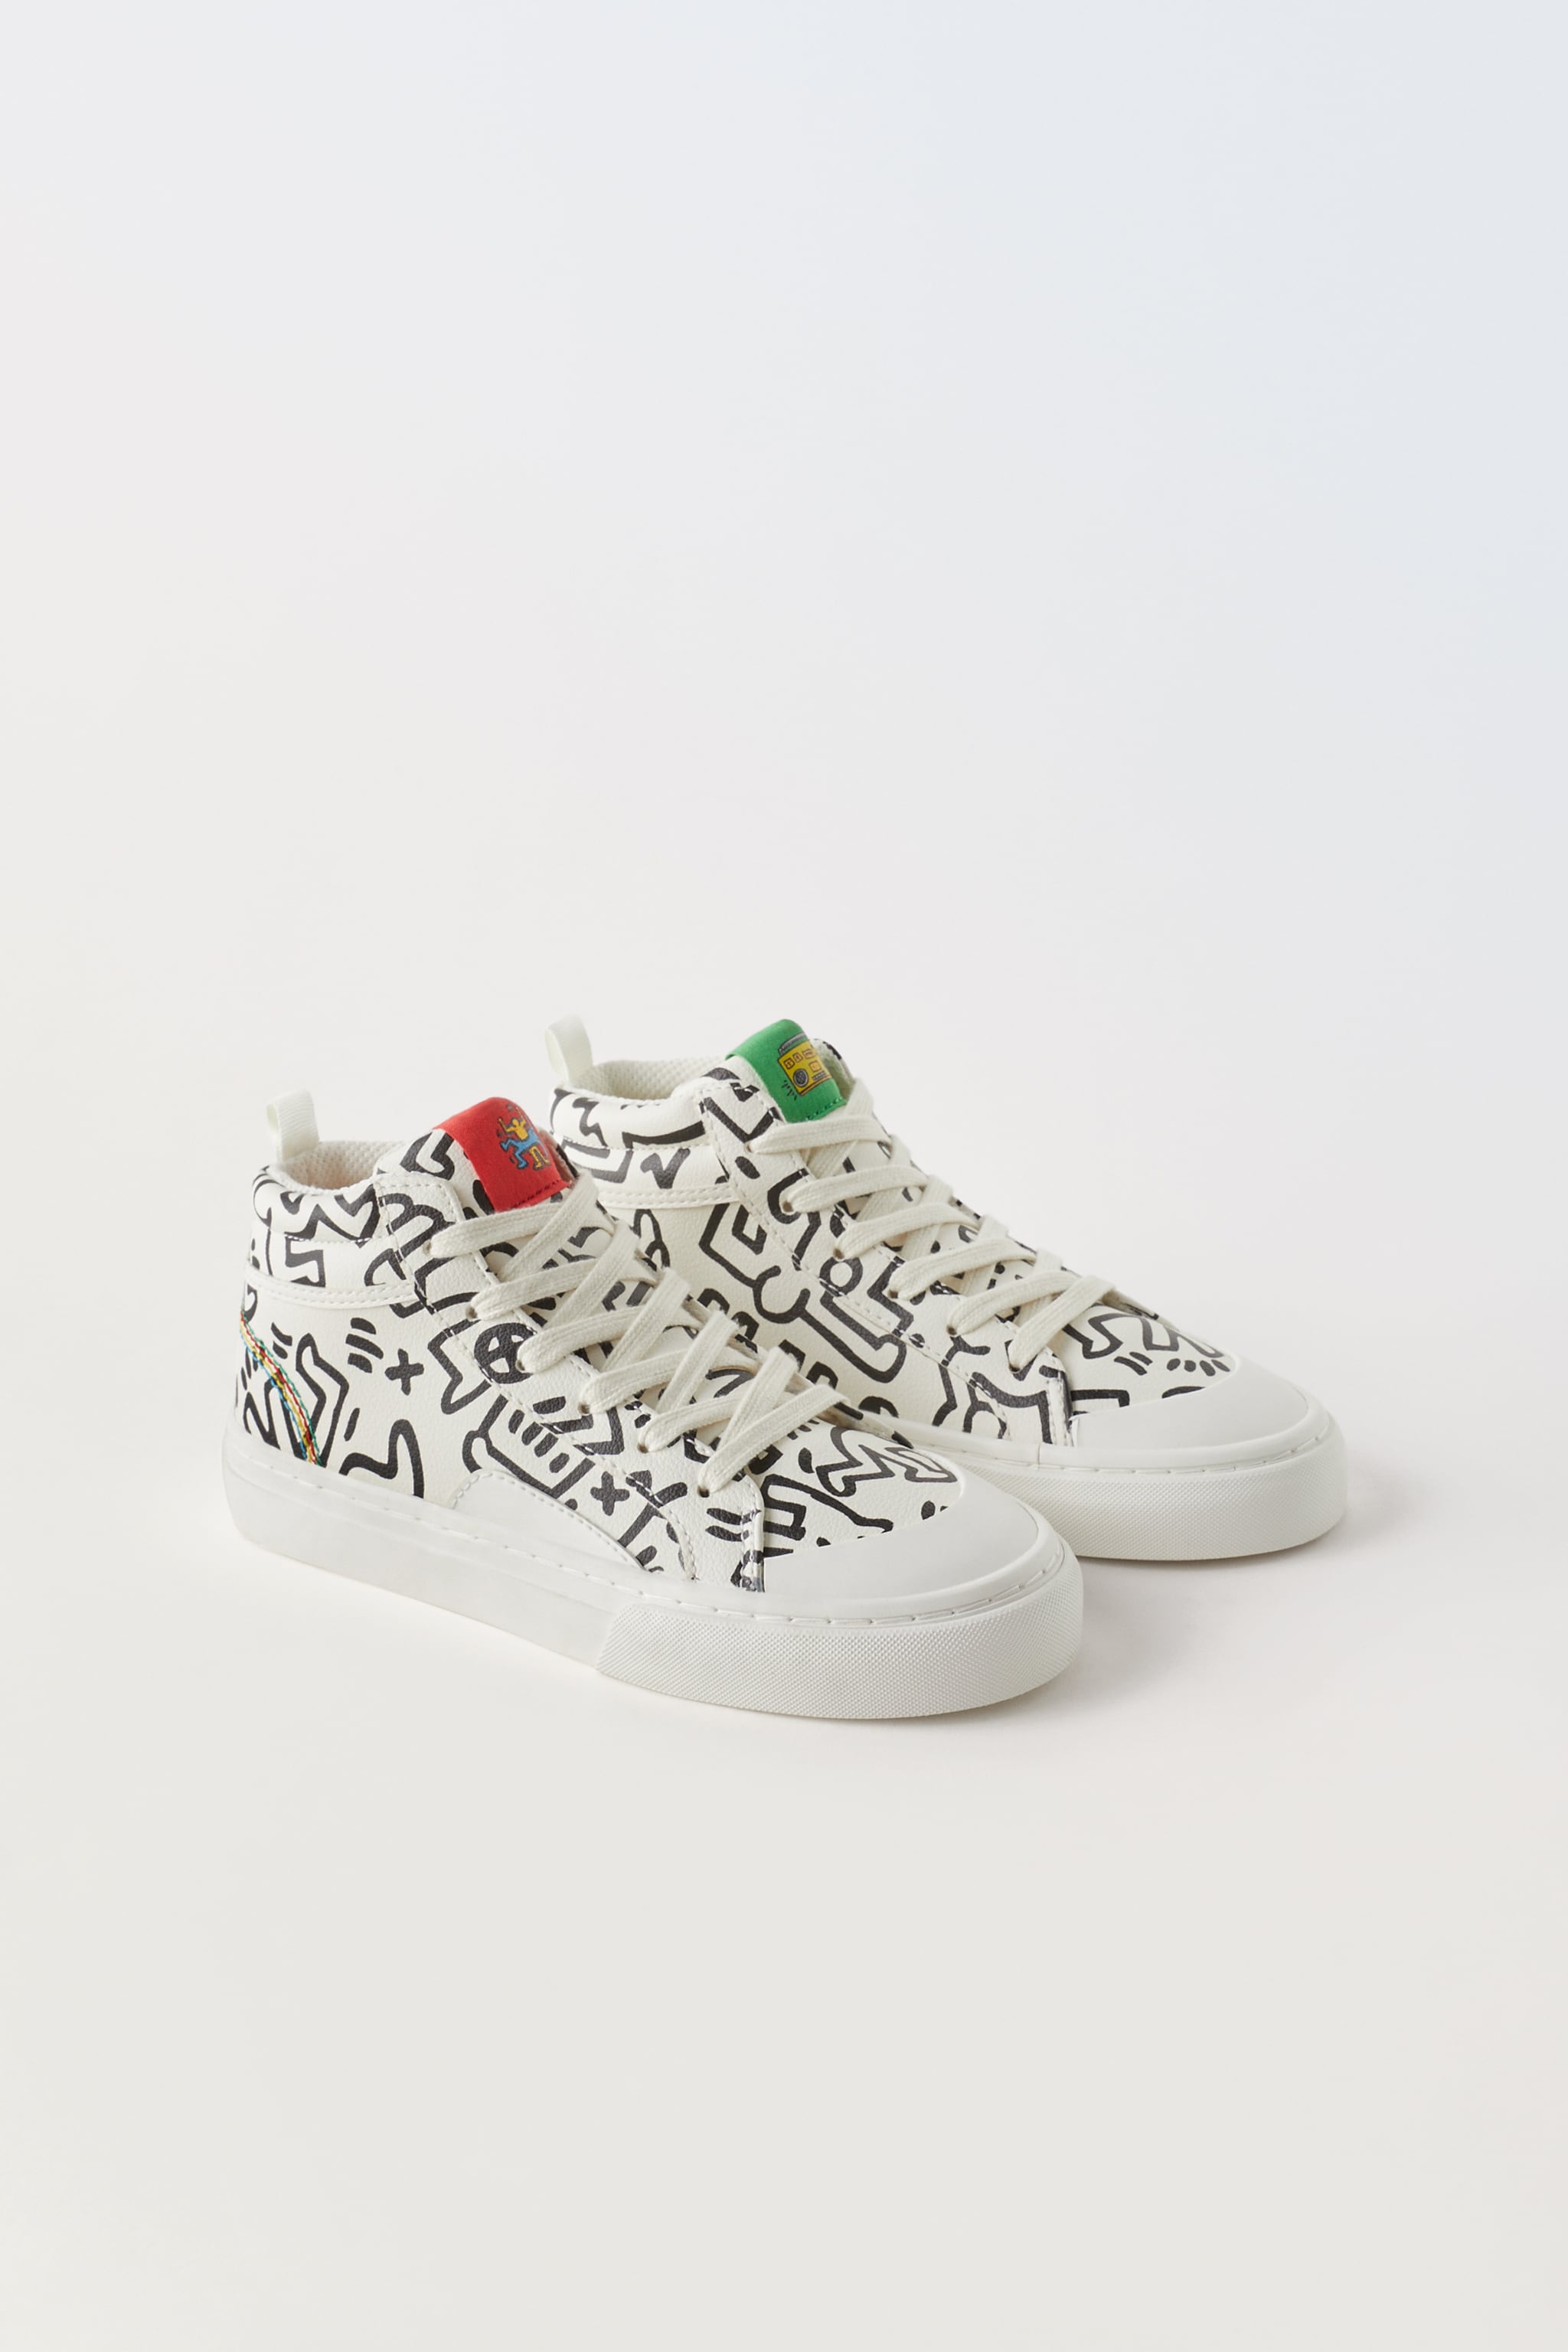 KEITH HARING HIGH TOP SNEAKERS